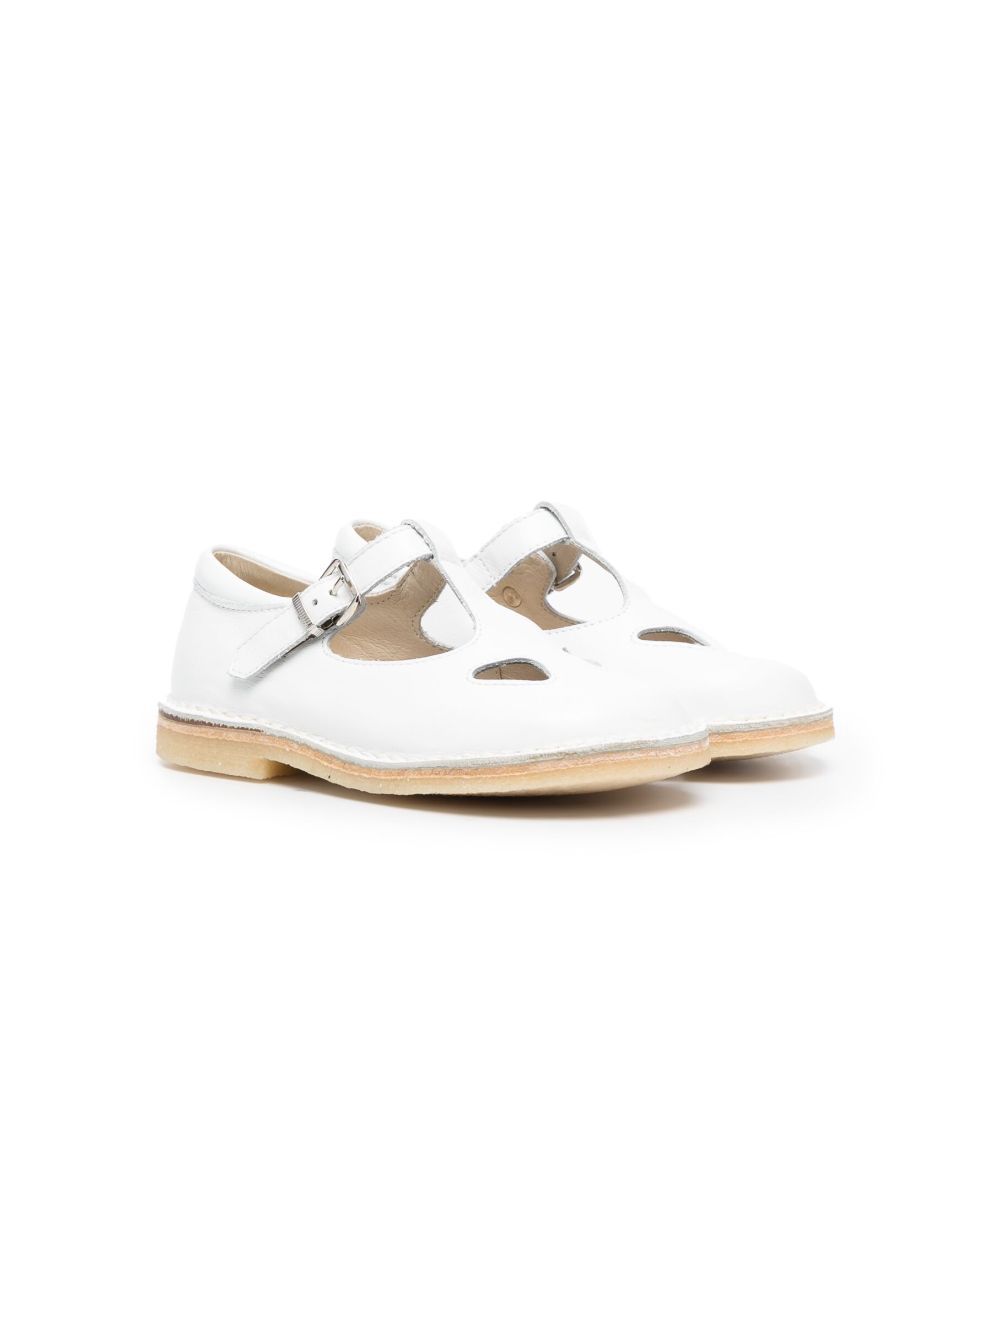 IL GUFO CUT-OUT LEATHER BALLERINAS